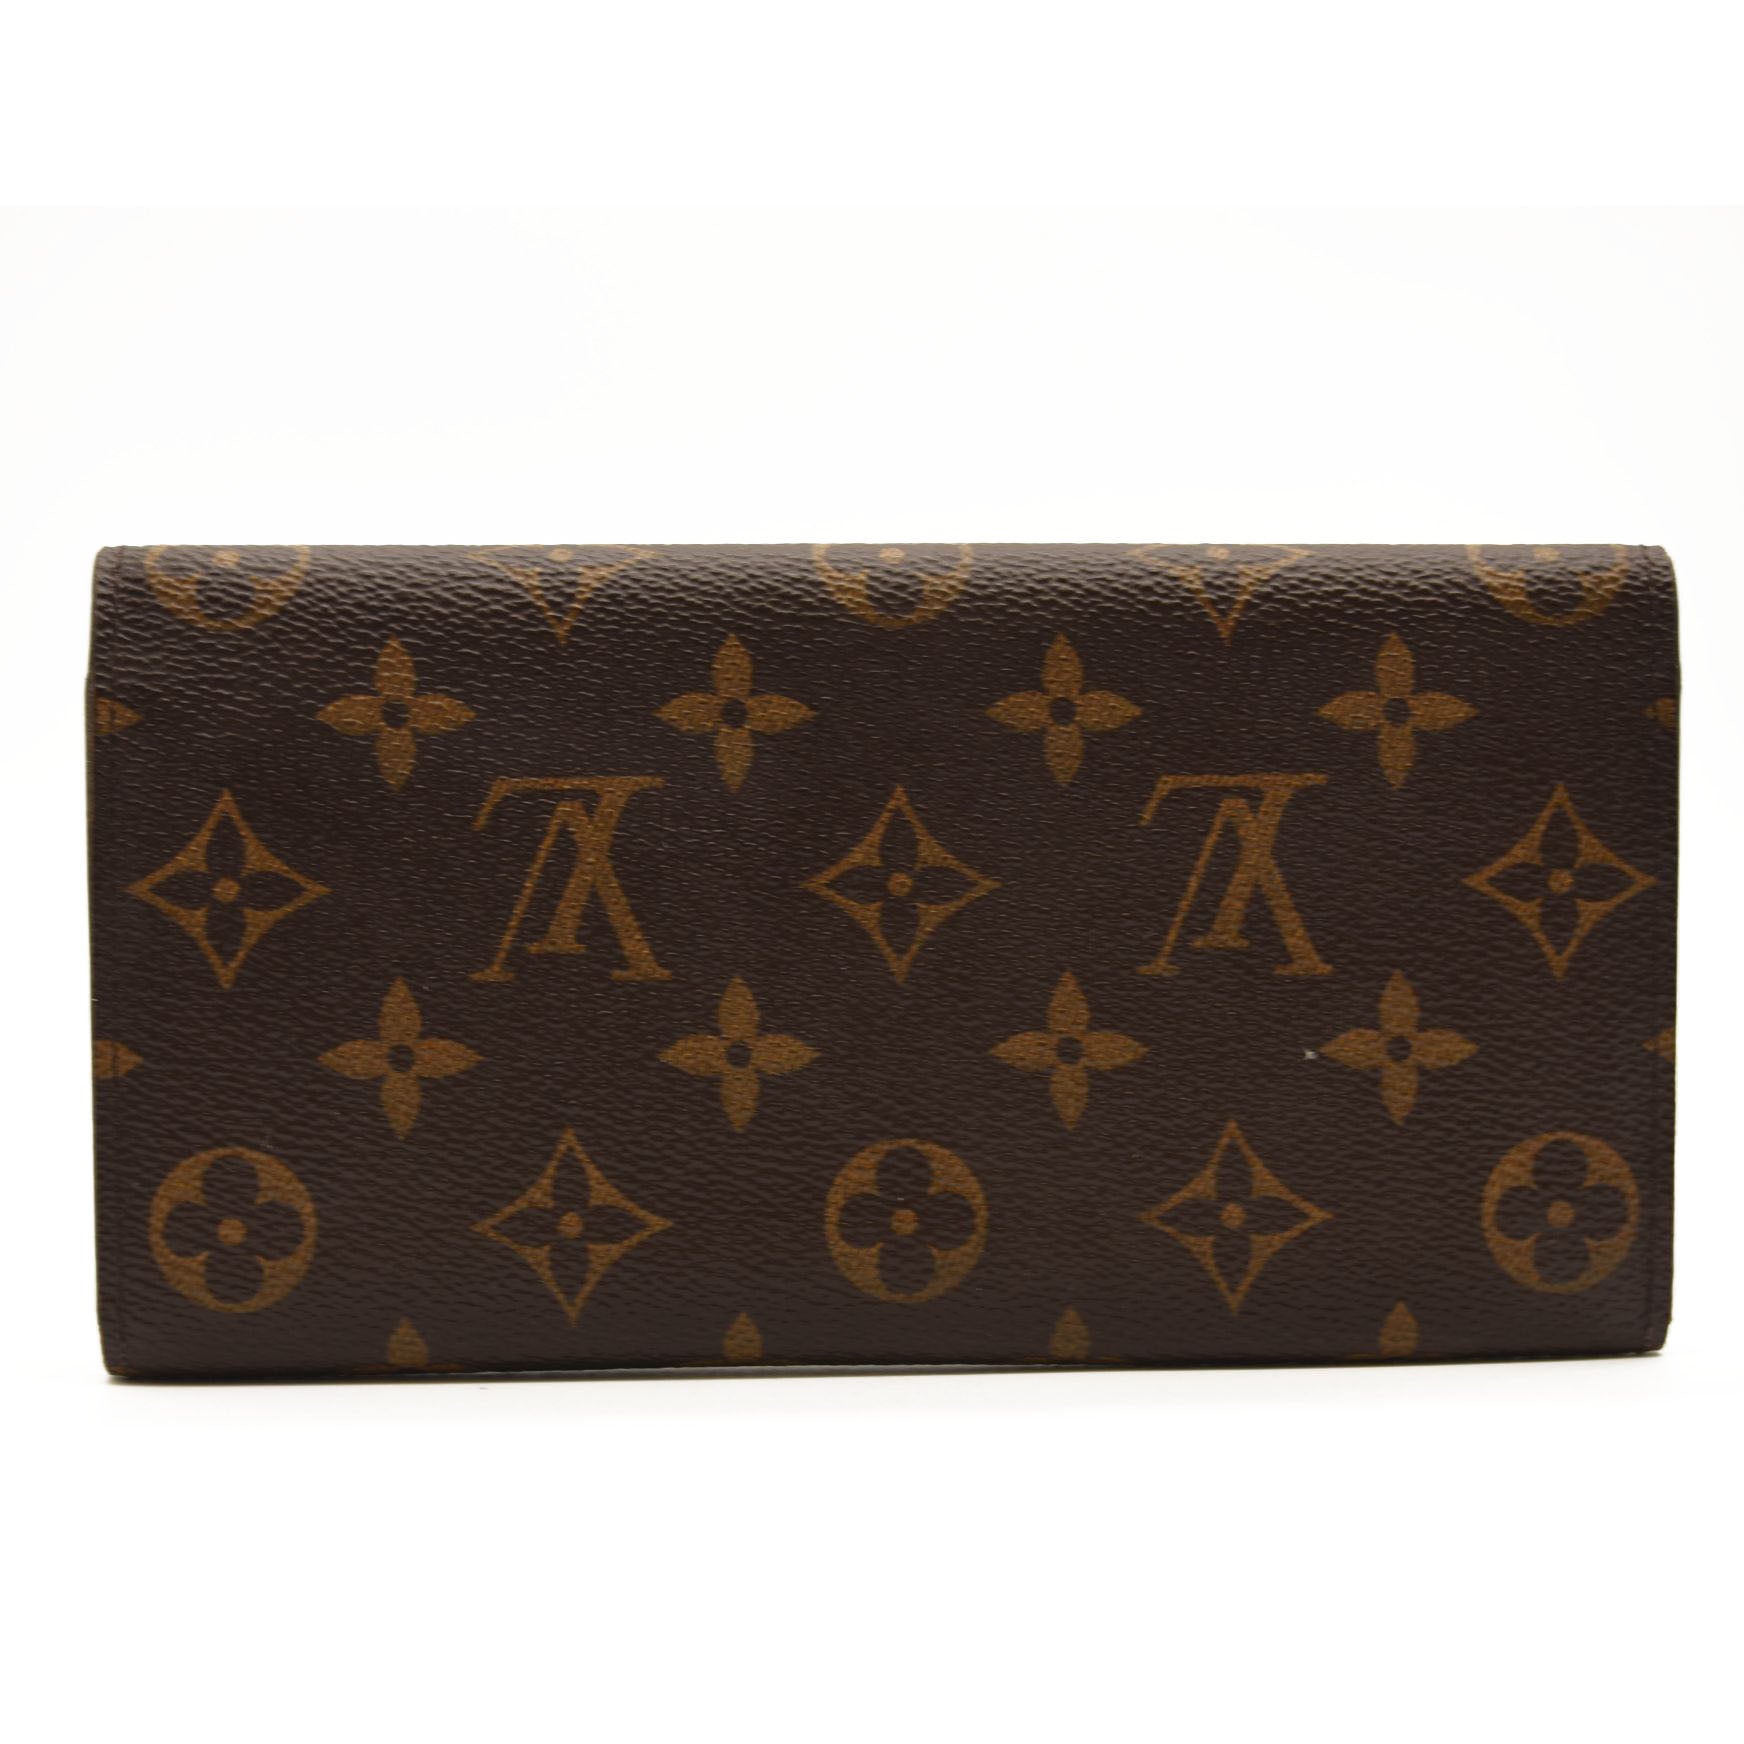 Louis Vuitton Emilie Wallet in fuchsia. Love it - and it holds my